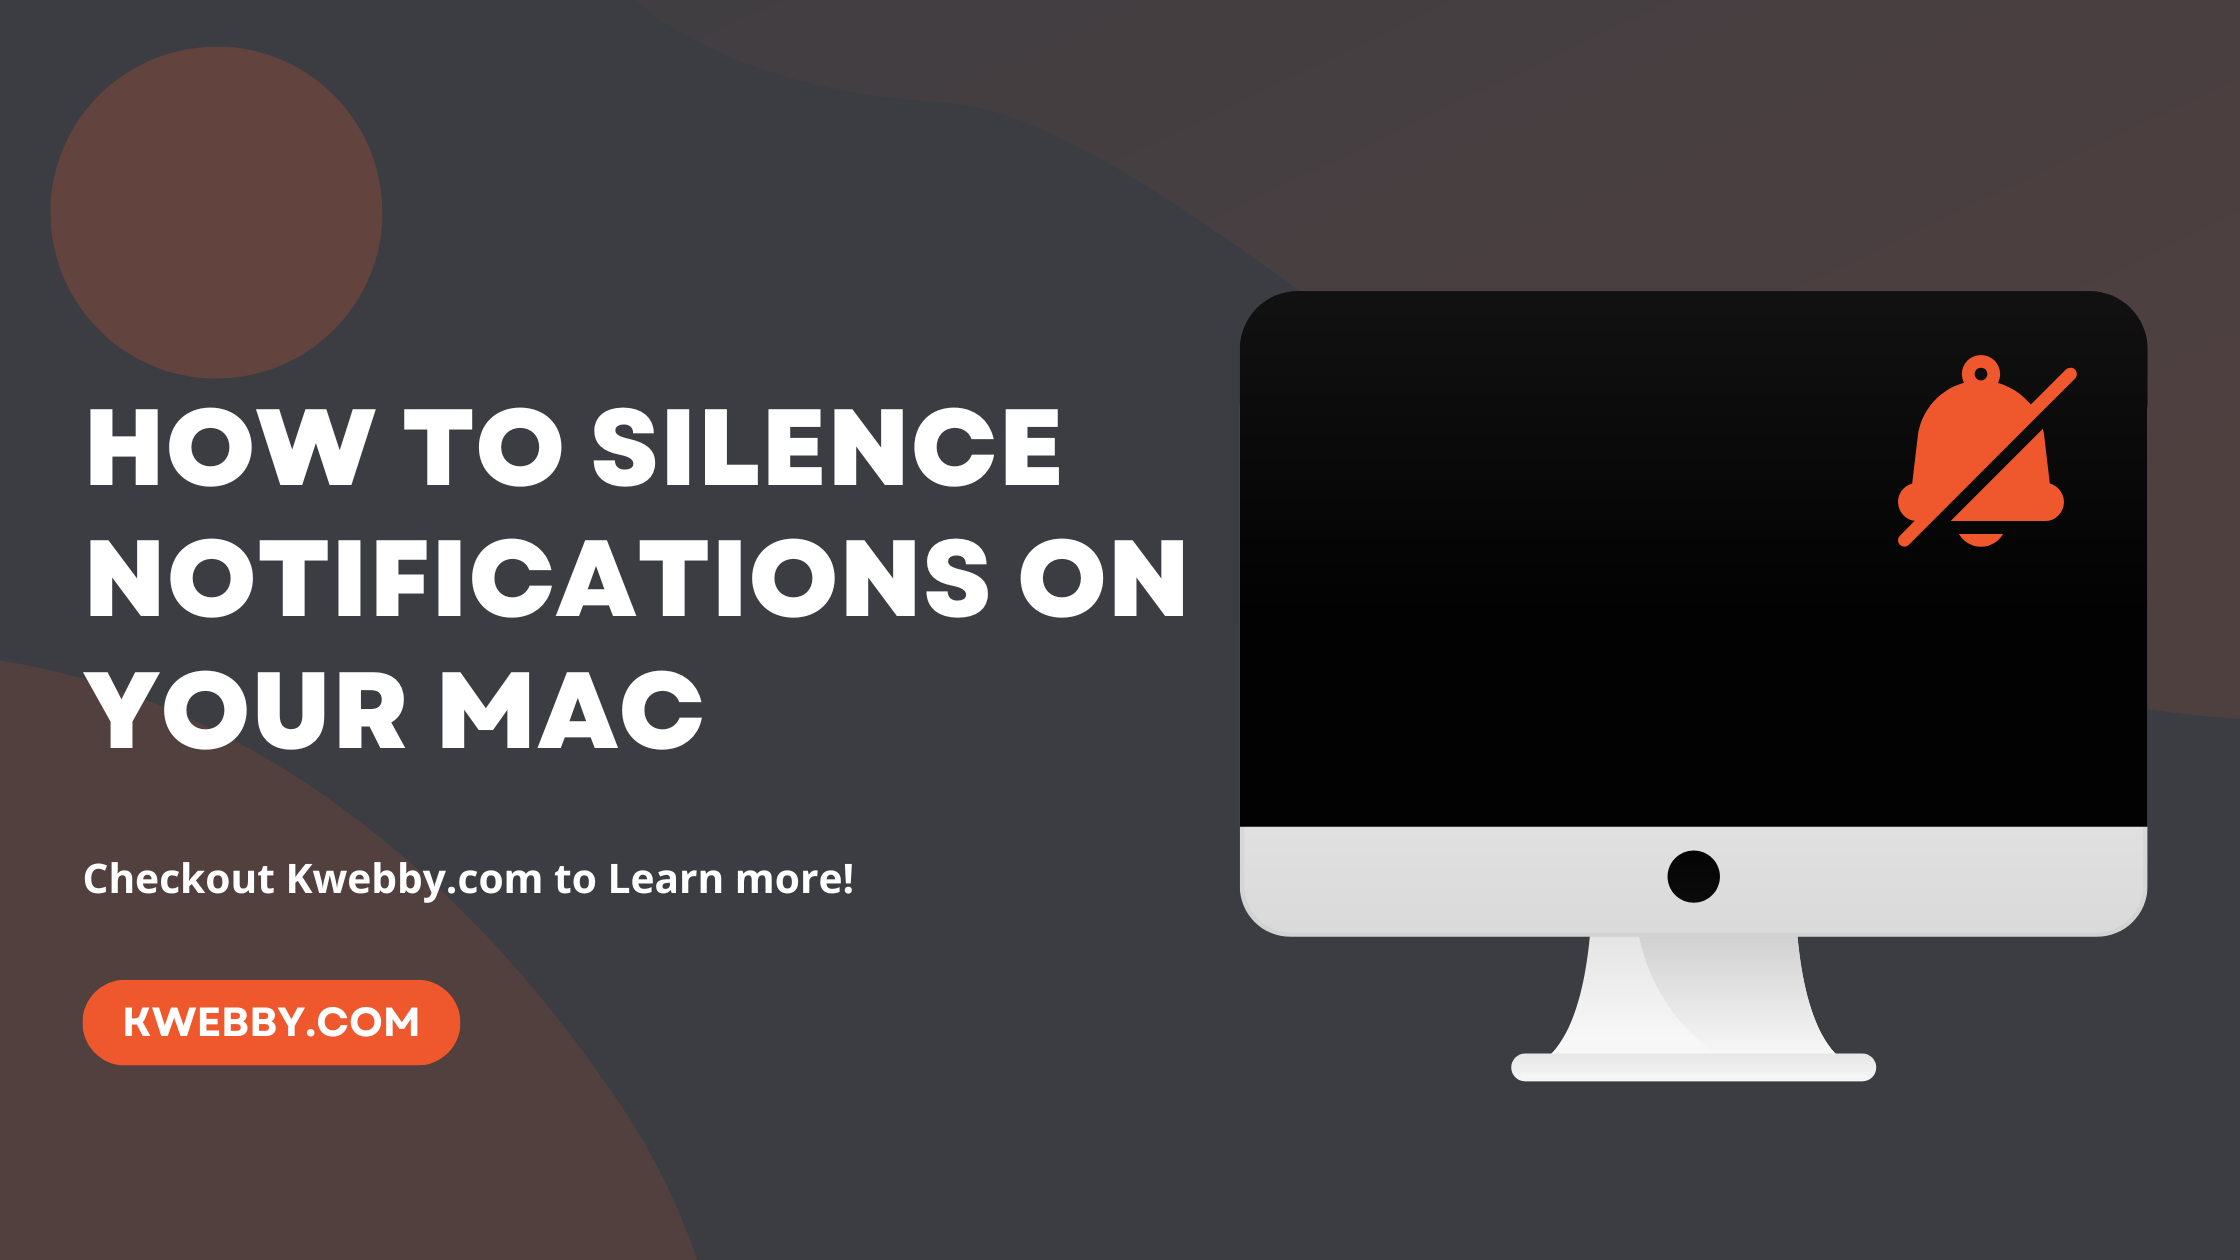 How to Silence Notifications on your Mac (2 Easy Method)